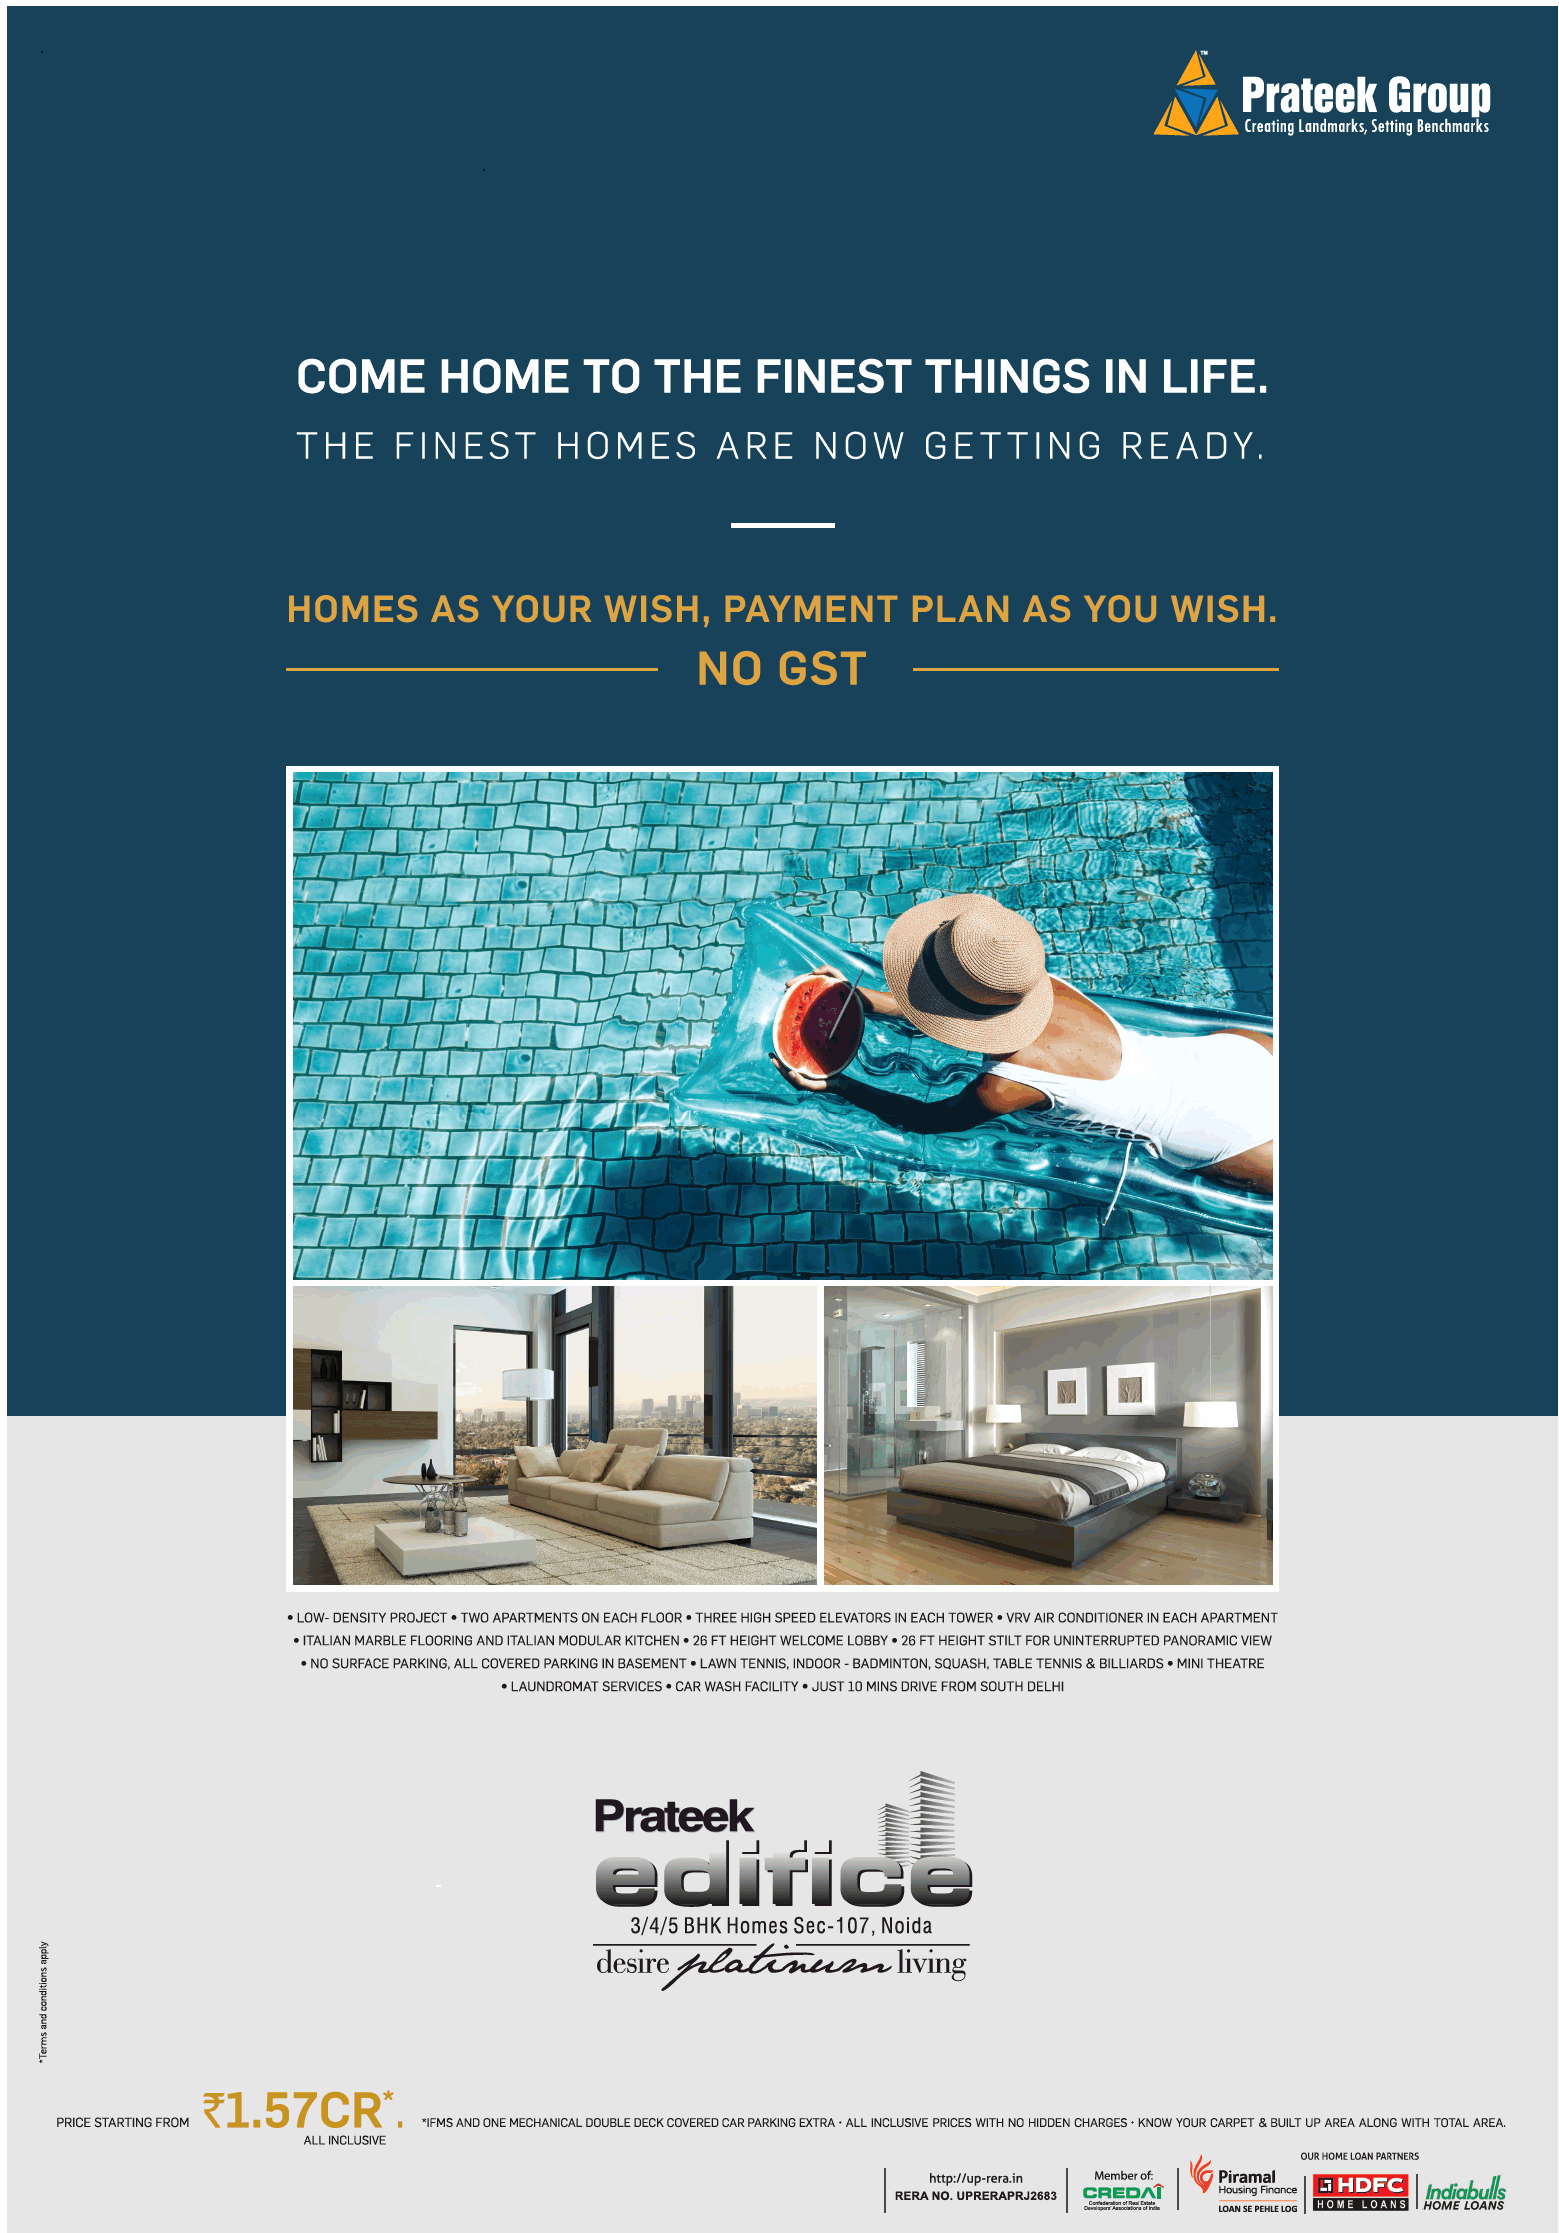 Homes with payment plans as your wish at Prateek Edifice in Noida Update